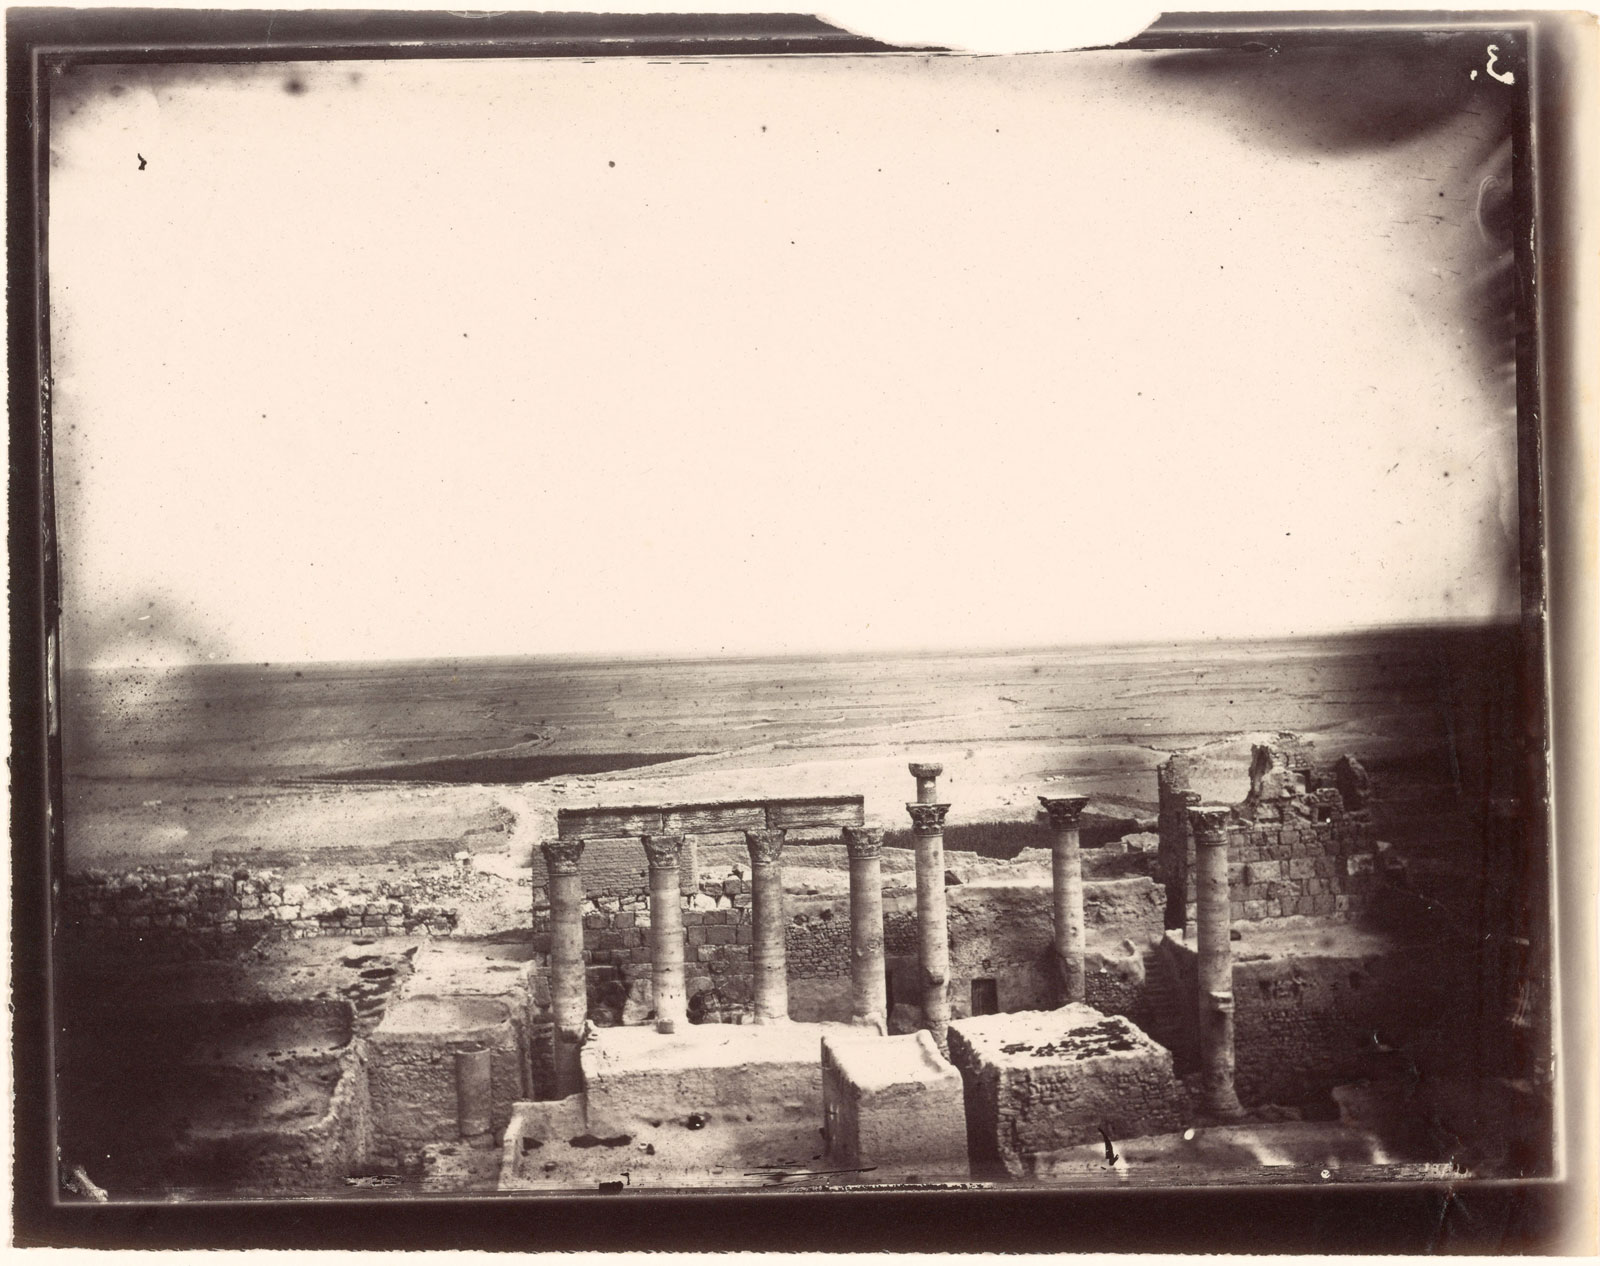 Columns, eastern part of the courtyard, Temple of Bel, Palmyra, photographed by Louis Vines, 1864